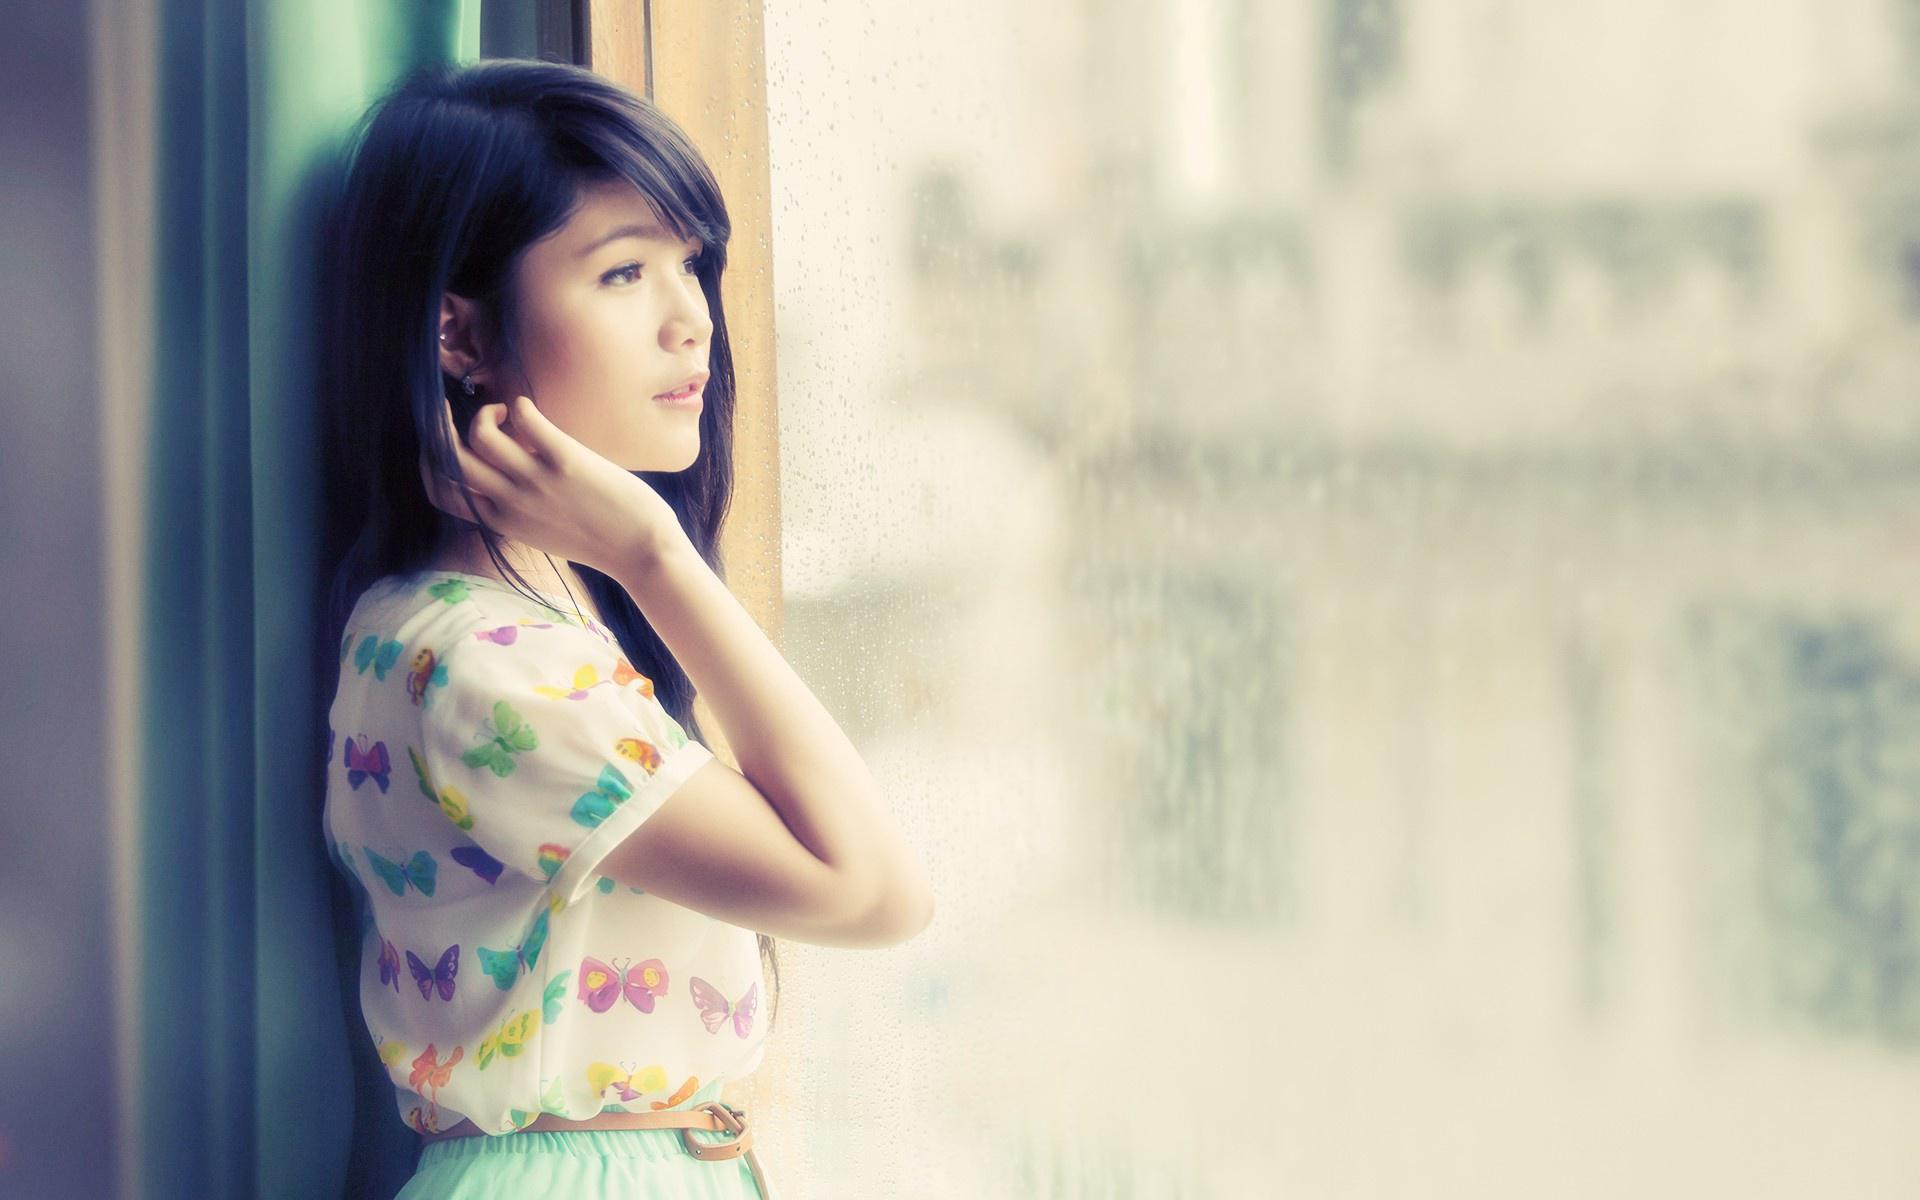 Girl Looking Out The Window Wallpaper Girls Wallpaper Better Images, Photos, Reviews